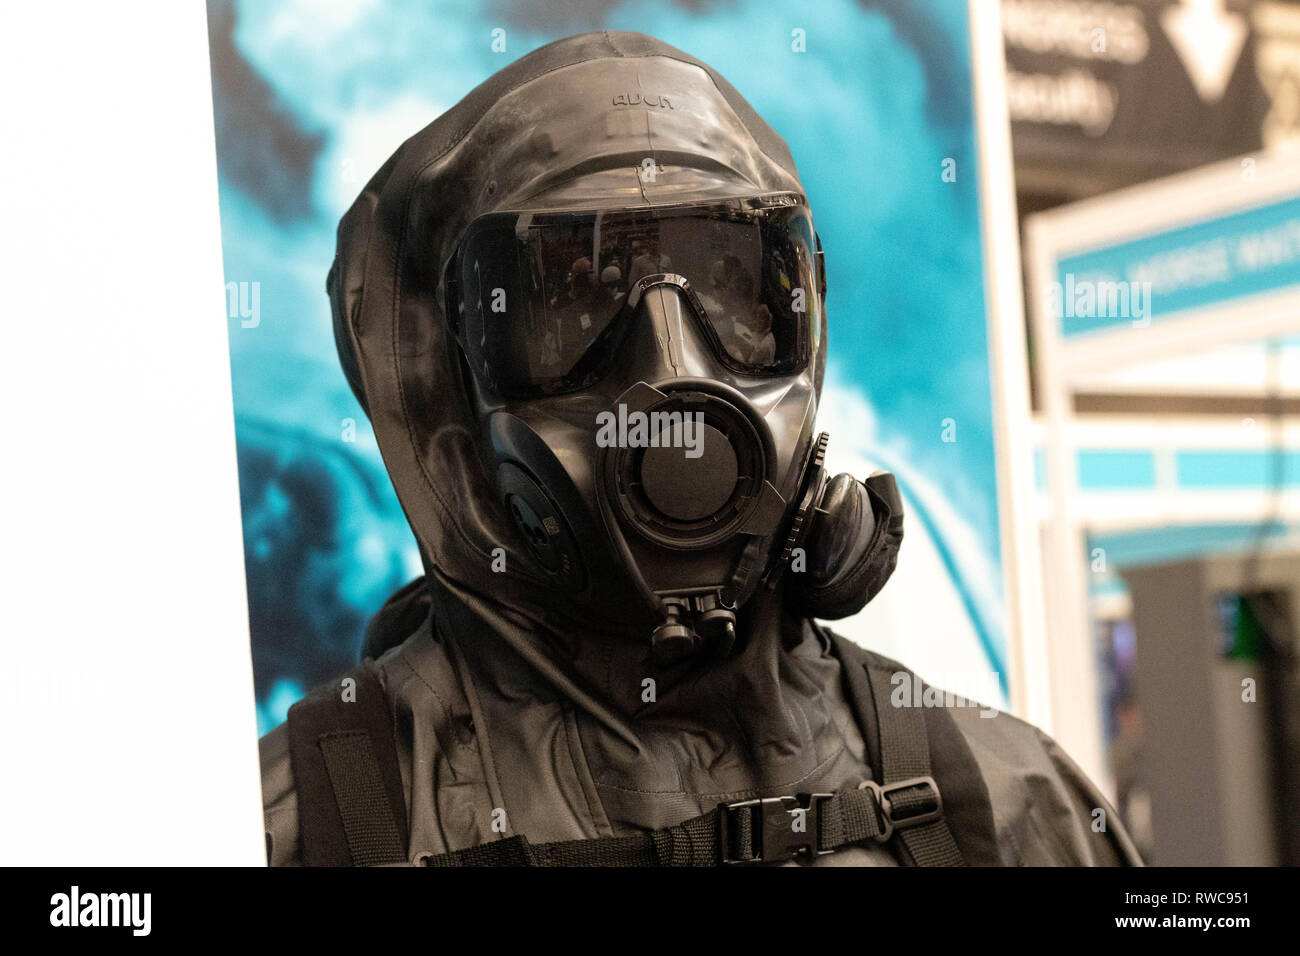 London 6th March 2019 Security and Counter Terror Expo 2019 at Olympia London, respirator for chemical, Nuclear and Biological attack protection Credit: Ian Davidson/Alamy Live News Stock Photo